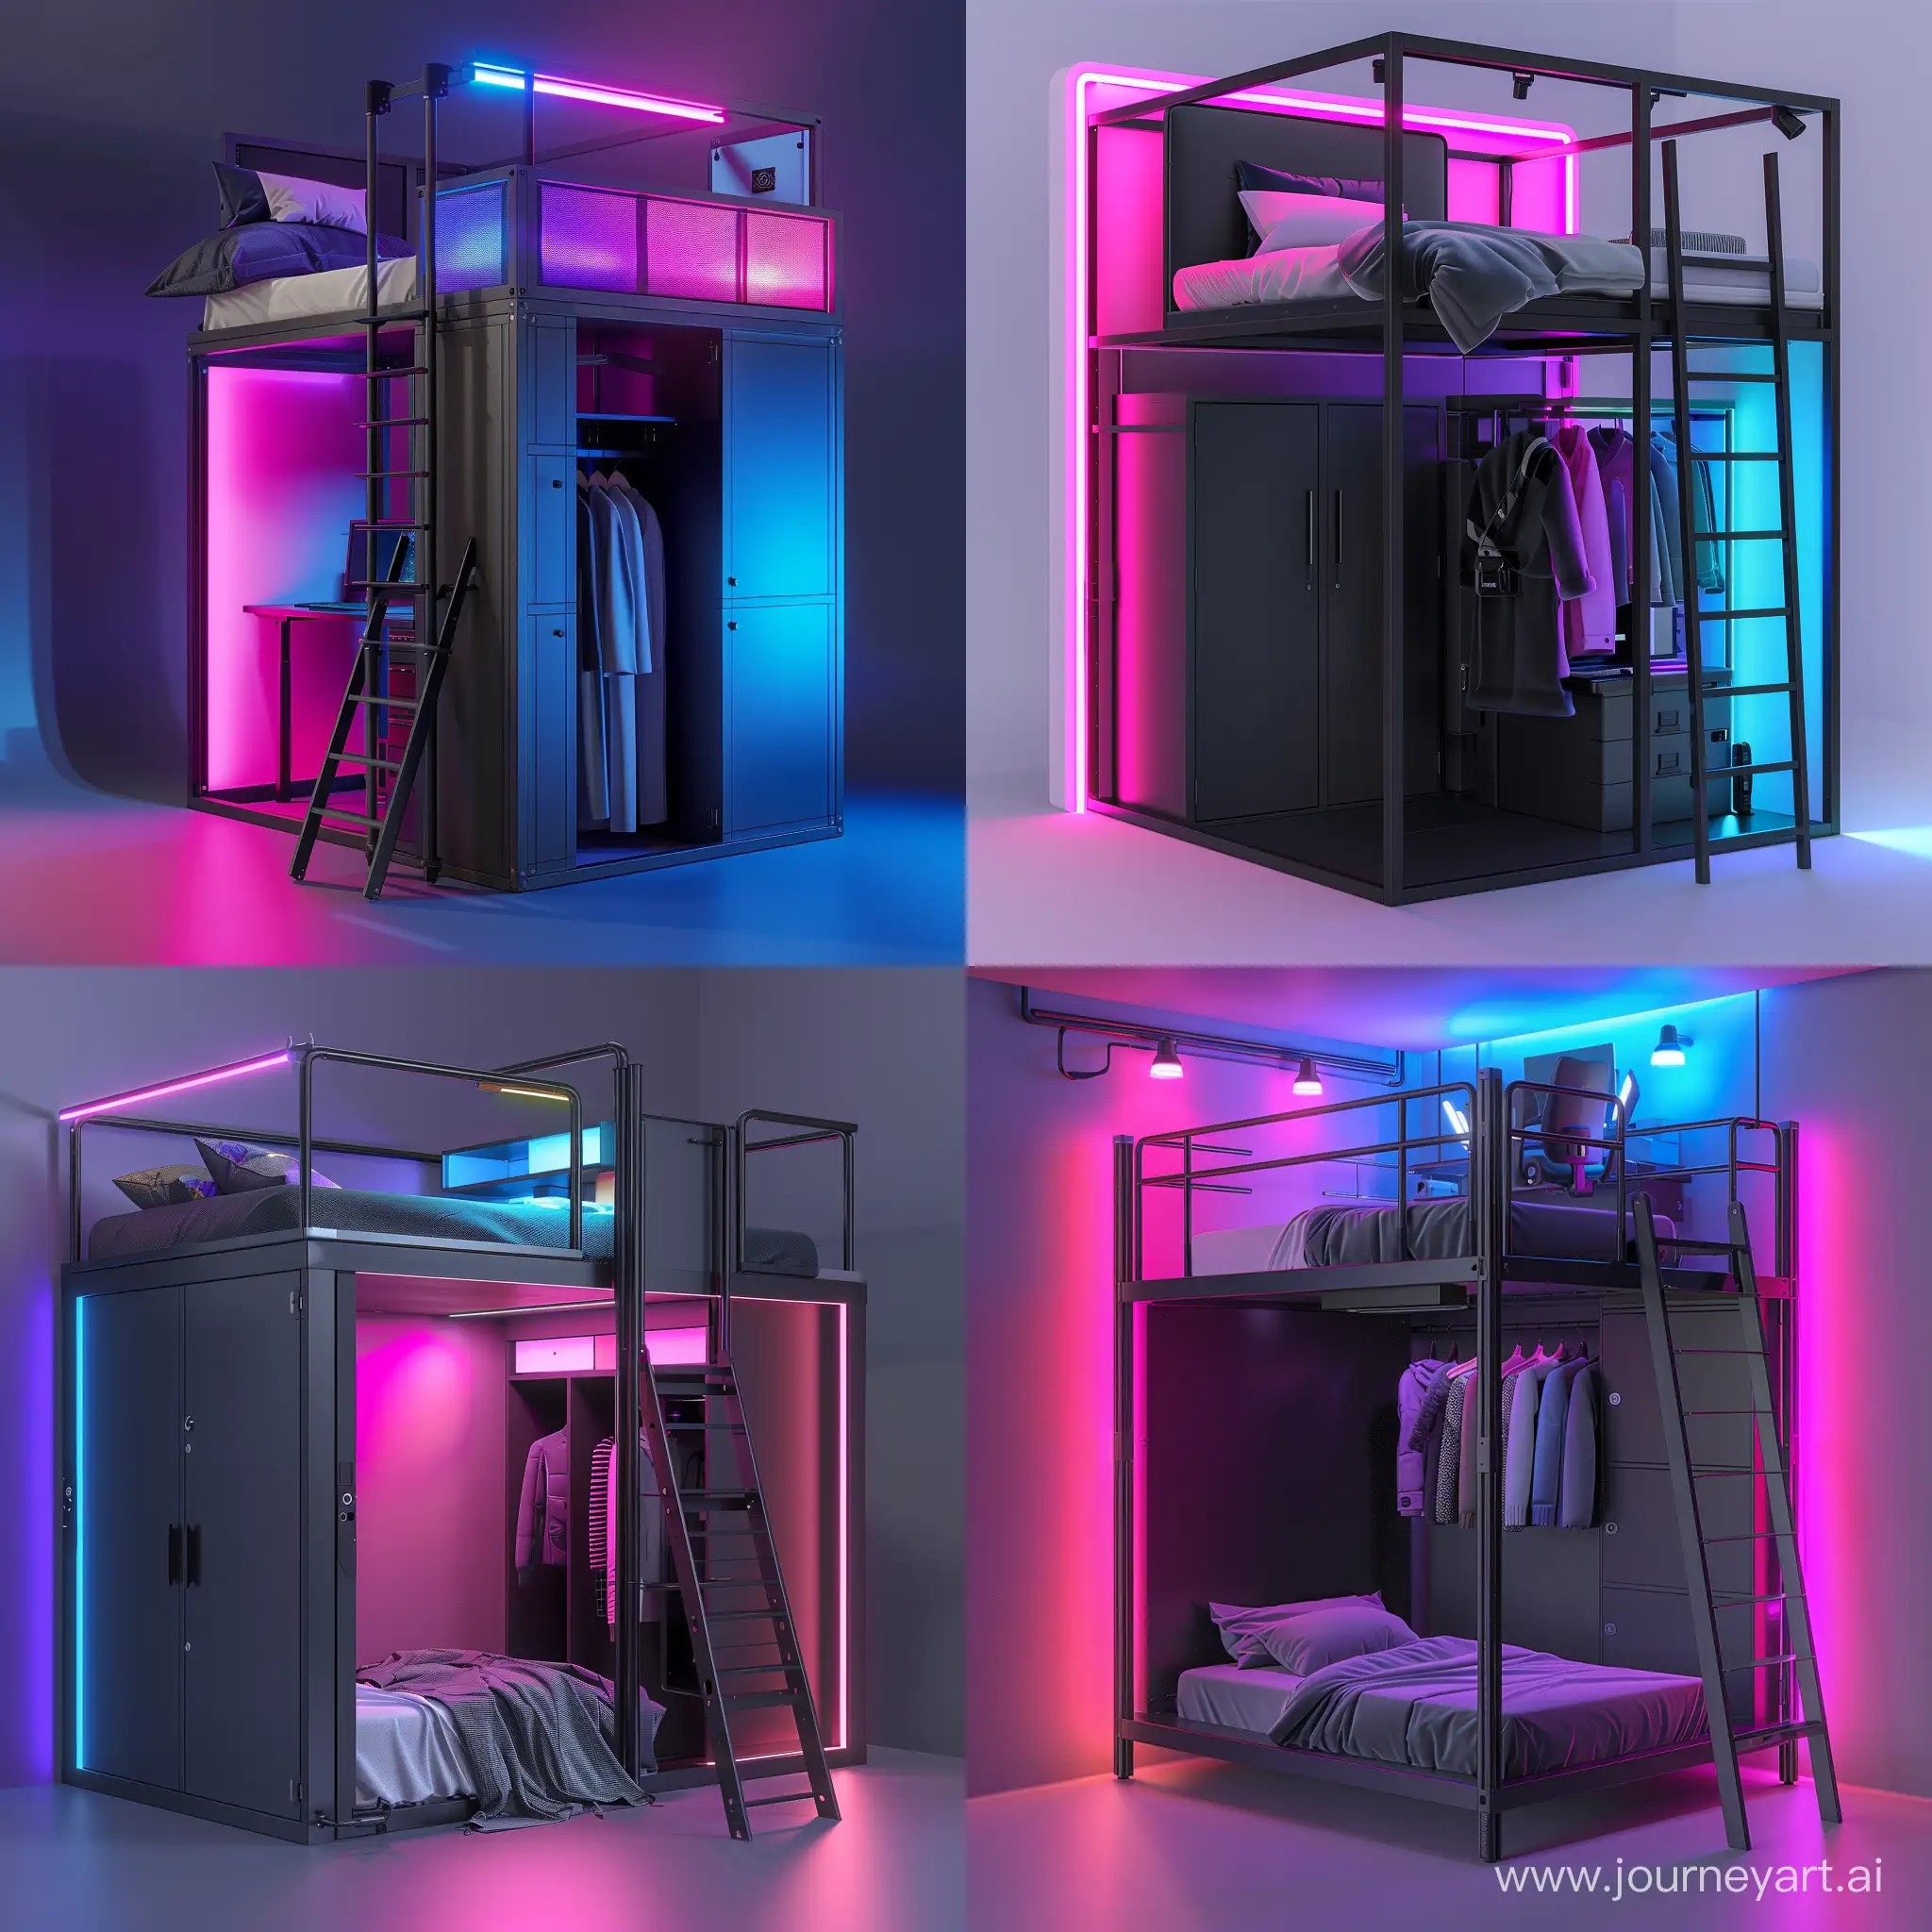 A unit for gamers containing a bed 10 centimeters high from the ground and a ladder that leads to an loft office with a wardrobe next to it. The structure of the unit is made of iron in a modern style. It contains strong lighting in bright pink, purple and blue. The dimensions of the unit are 3 meters and 150 cm, with a height of 3 meters. The colors of the unit are black and gray.